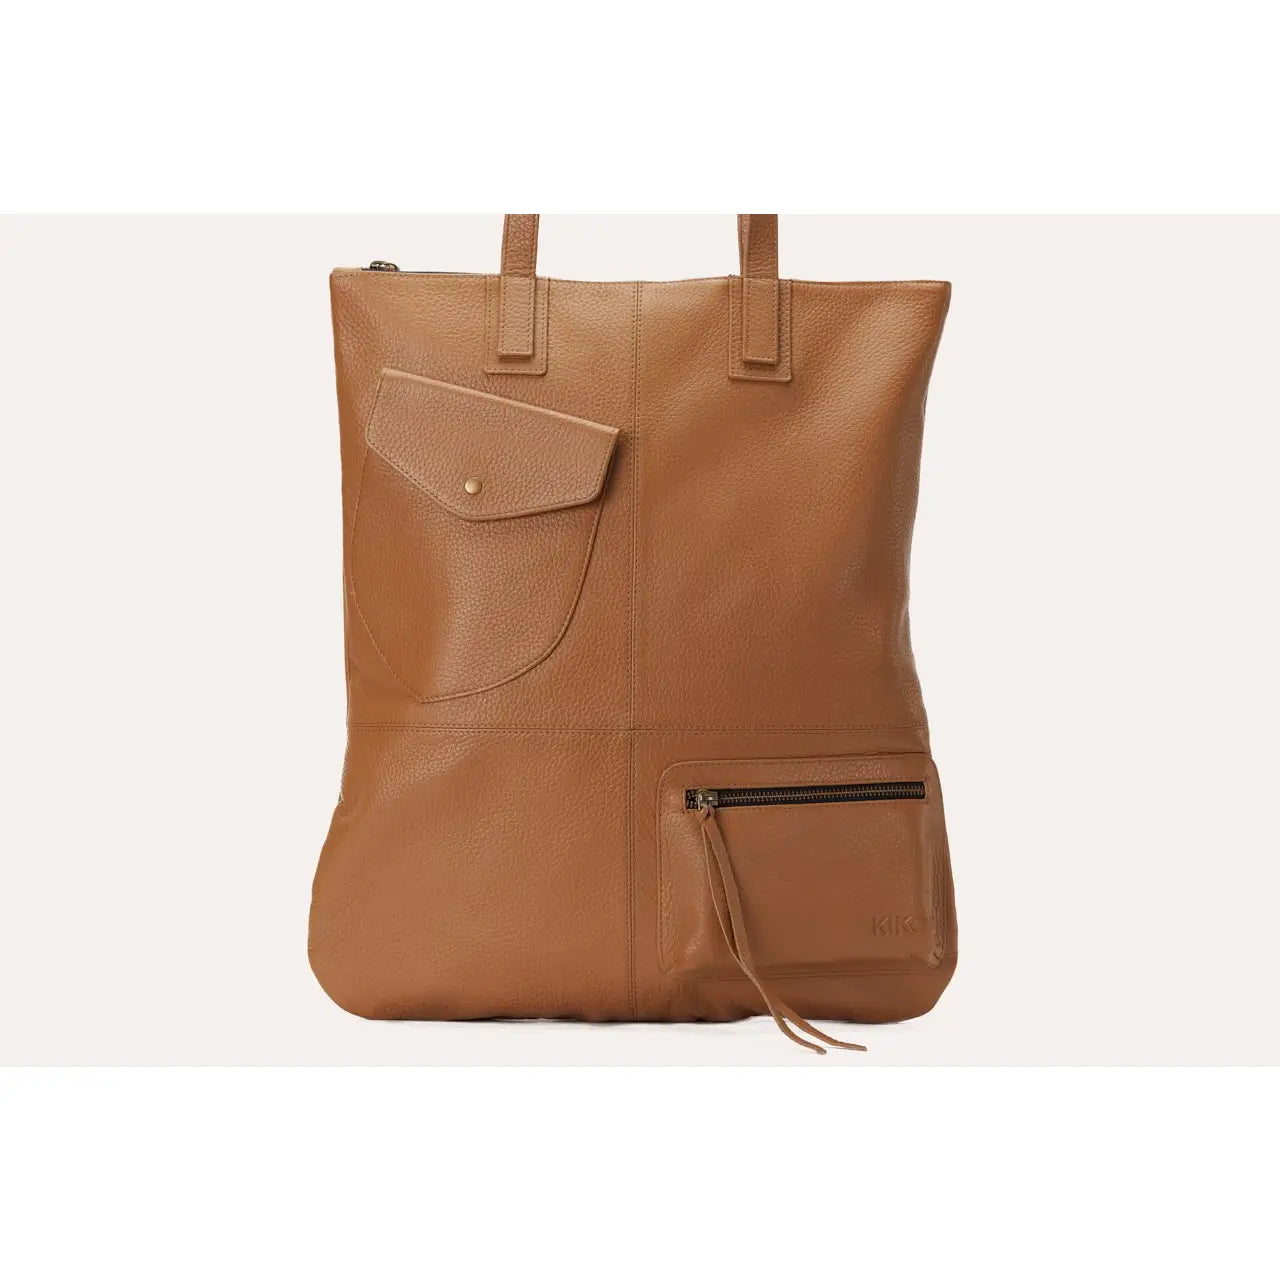 Holden Leather Tote Bag